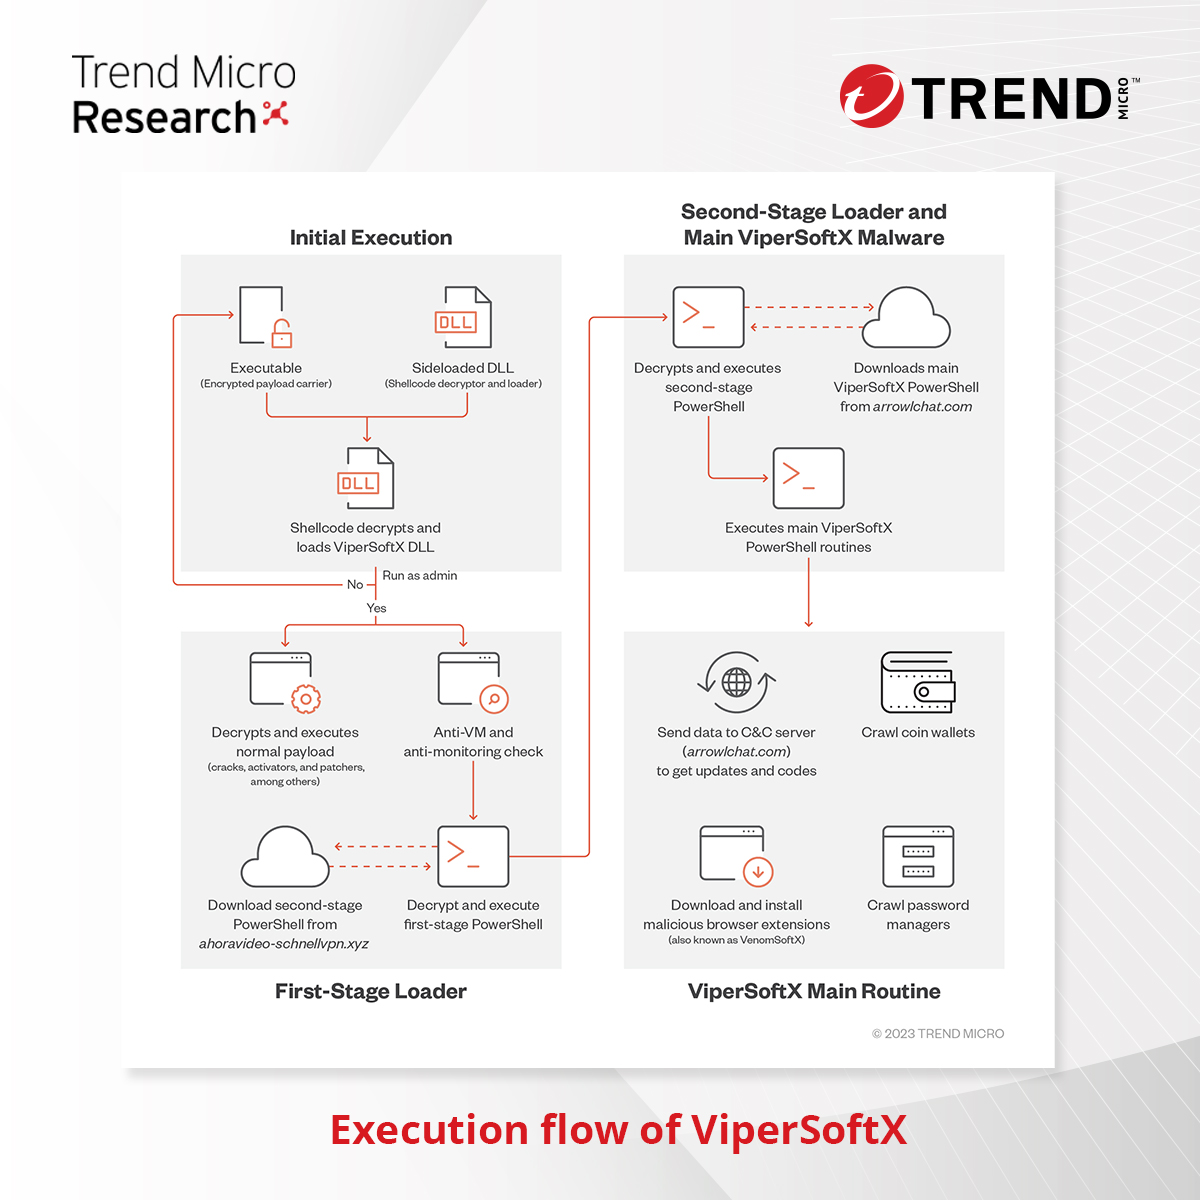 The #ViperSoftX #malware has added another capability to its arsenal: Initially known as a type of cryptocurrency-stealing malware, its latest campaign now includes password-stealing capabilities. 

Know more here: research.trendmicro.com/ViperSoftX